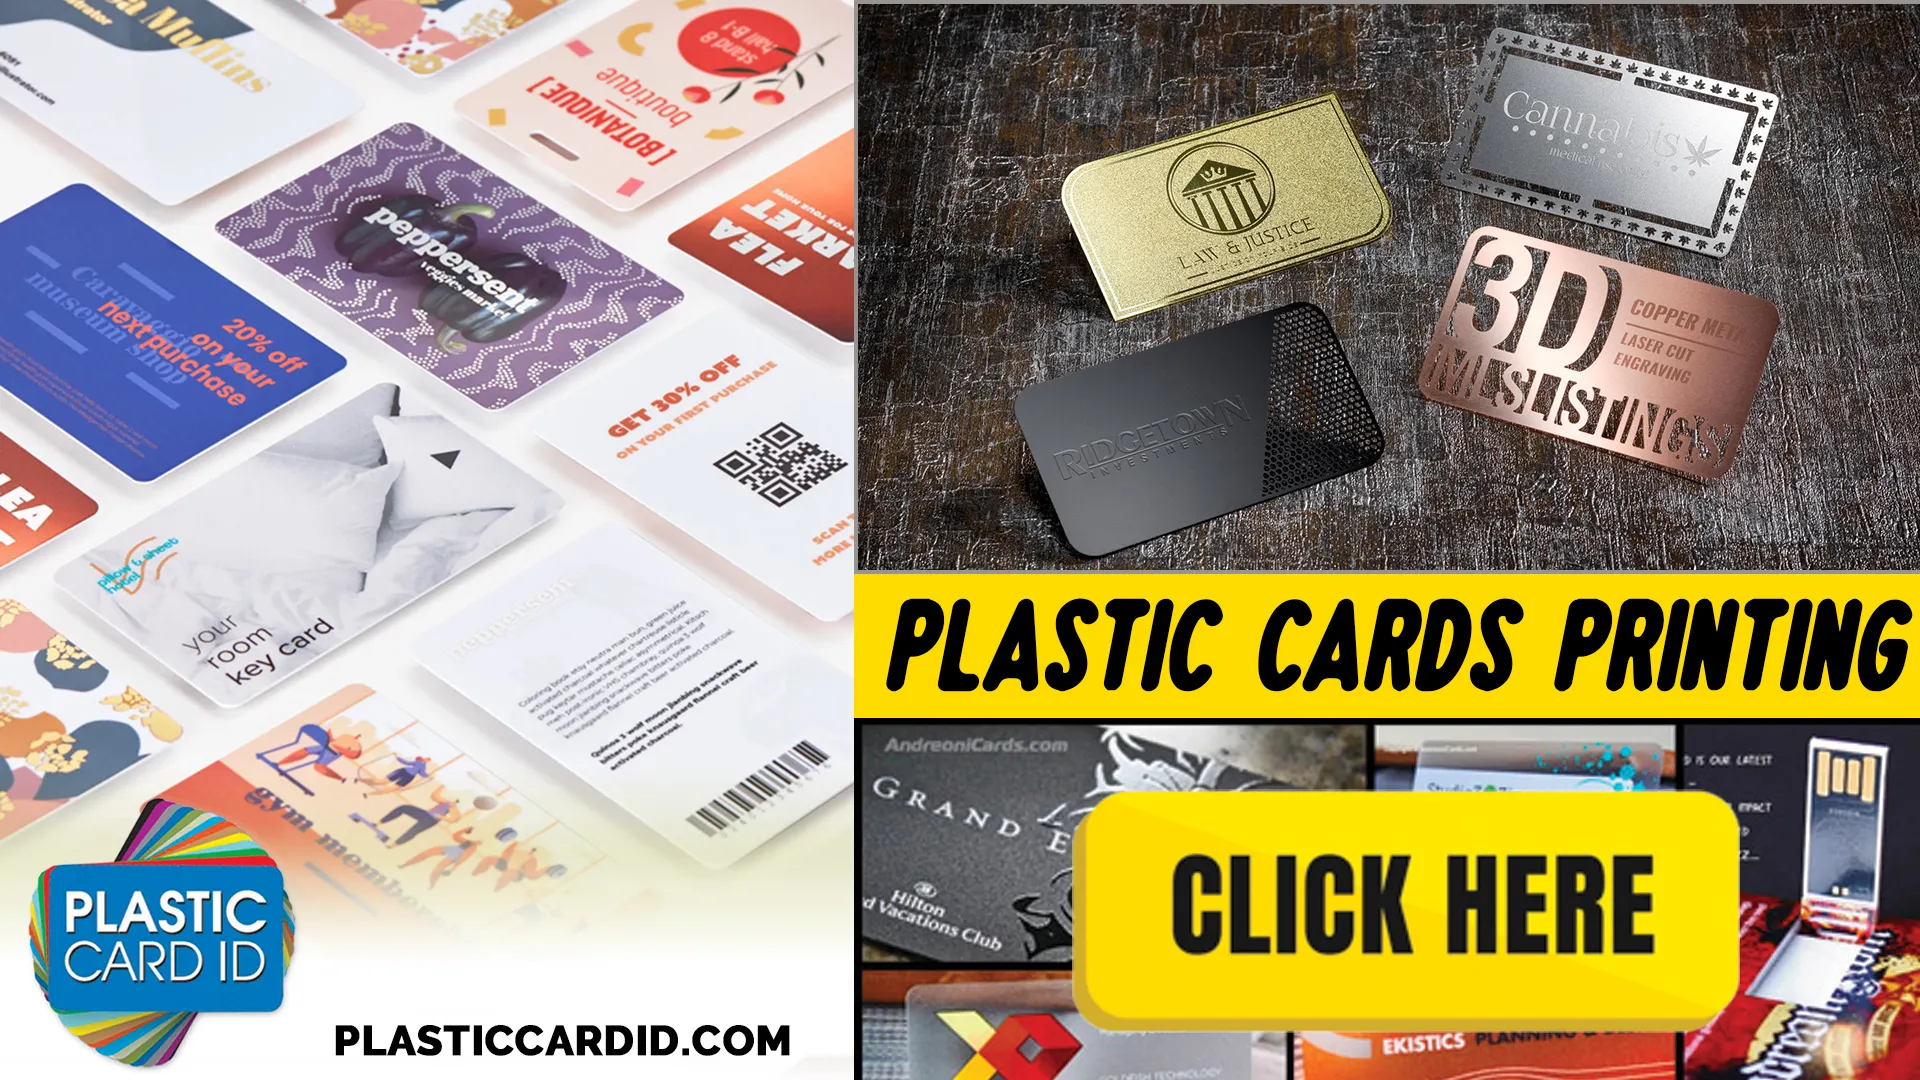 Maintaining the Shine: Daily Care for Your Plastic Cards